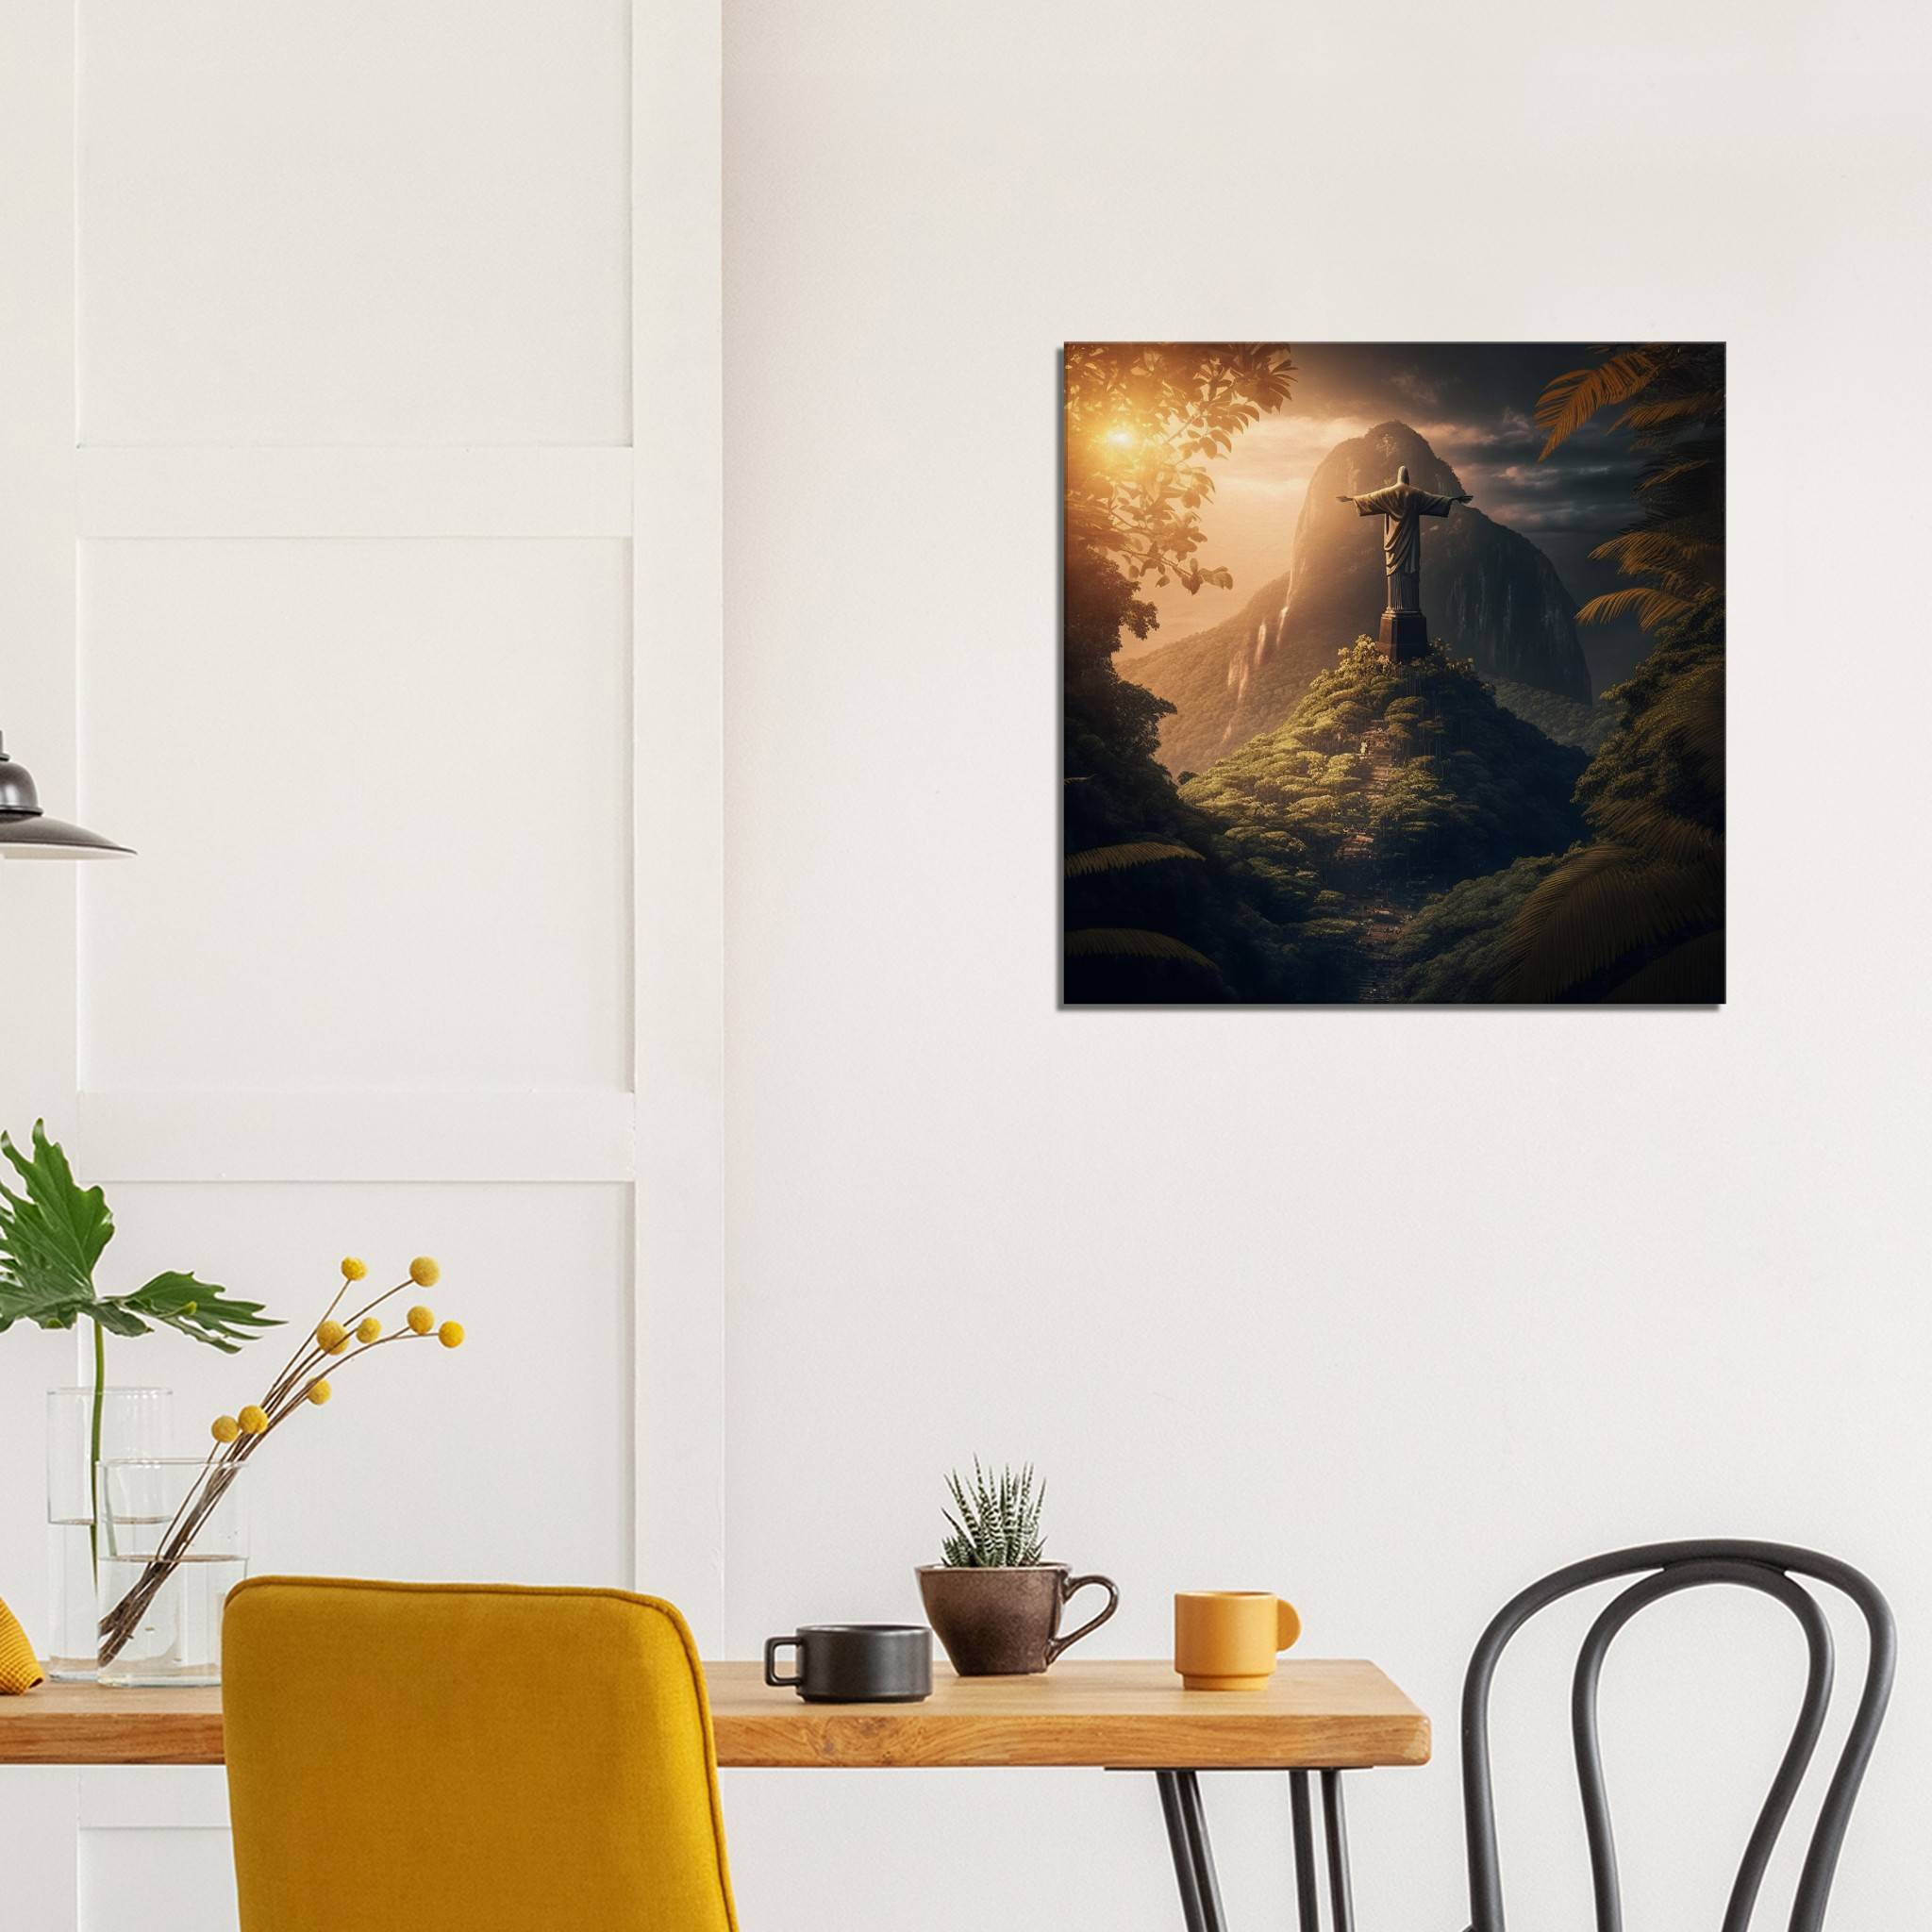 Christ the Redeemer 11 / 60 x 60cm (Canvas Print) Canvas Print Canvas reproduction The Pianist Print On Demand Fabled Gallery https://fabledgallery.art/product/crist-redentor-11-60-x-60cm-canvas-print/